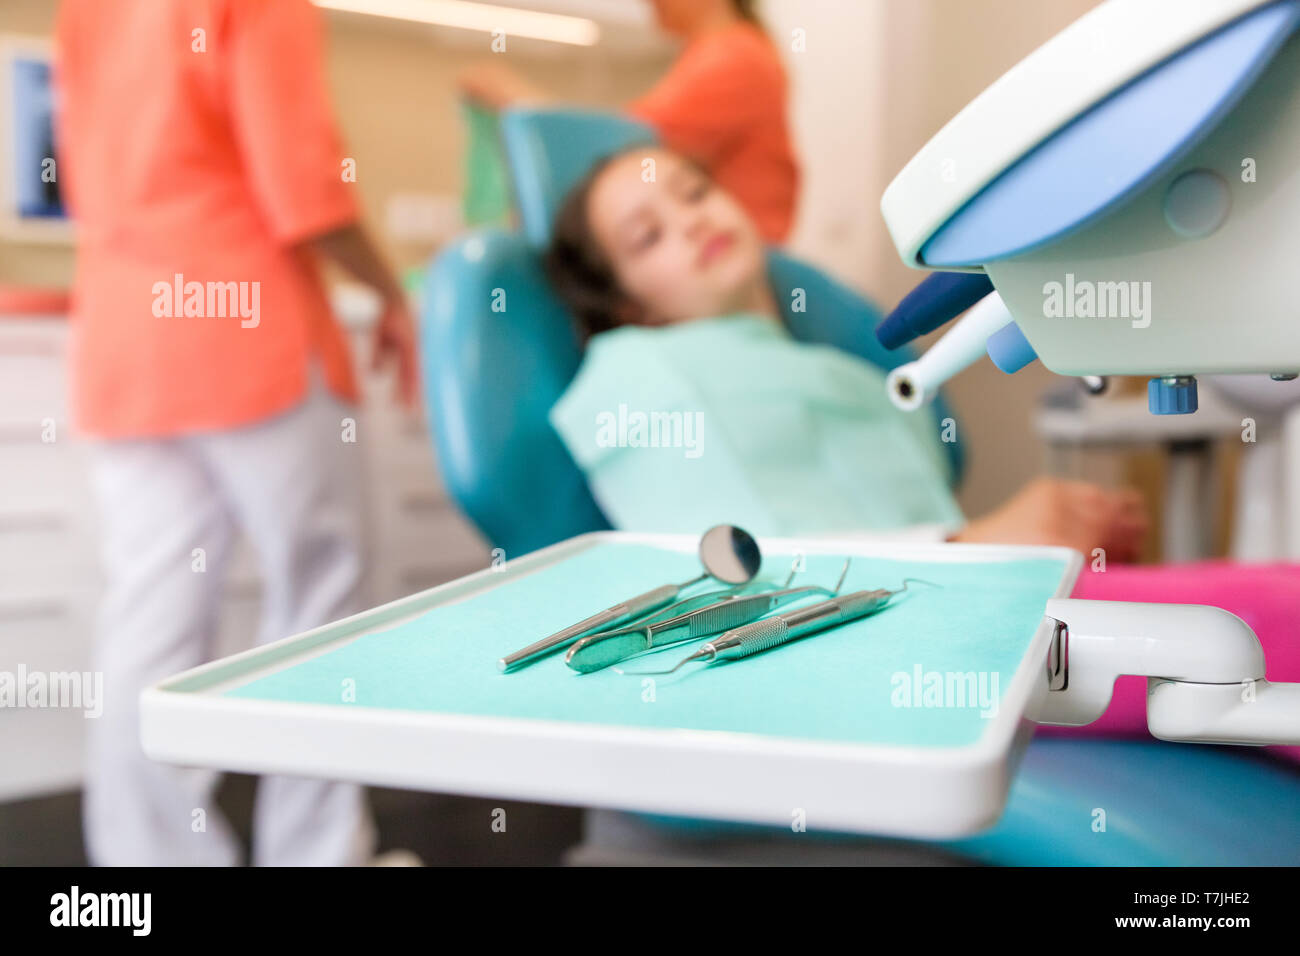 10-year-old girl at the dentist waiting for the checkup with dentist tools and instruments in the foreground Stock Photo